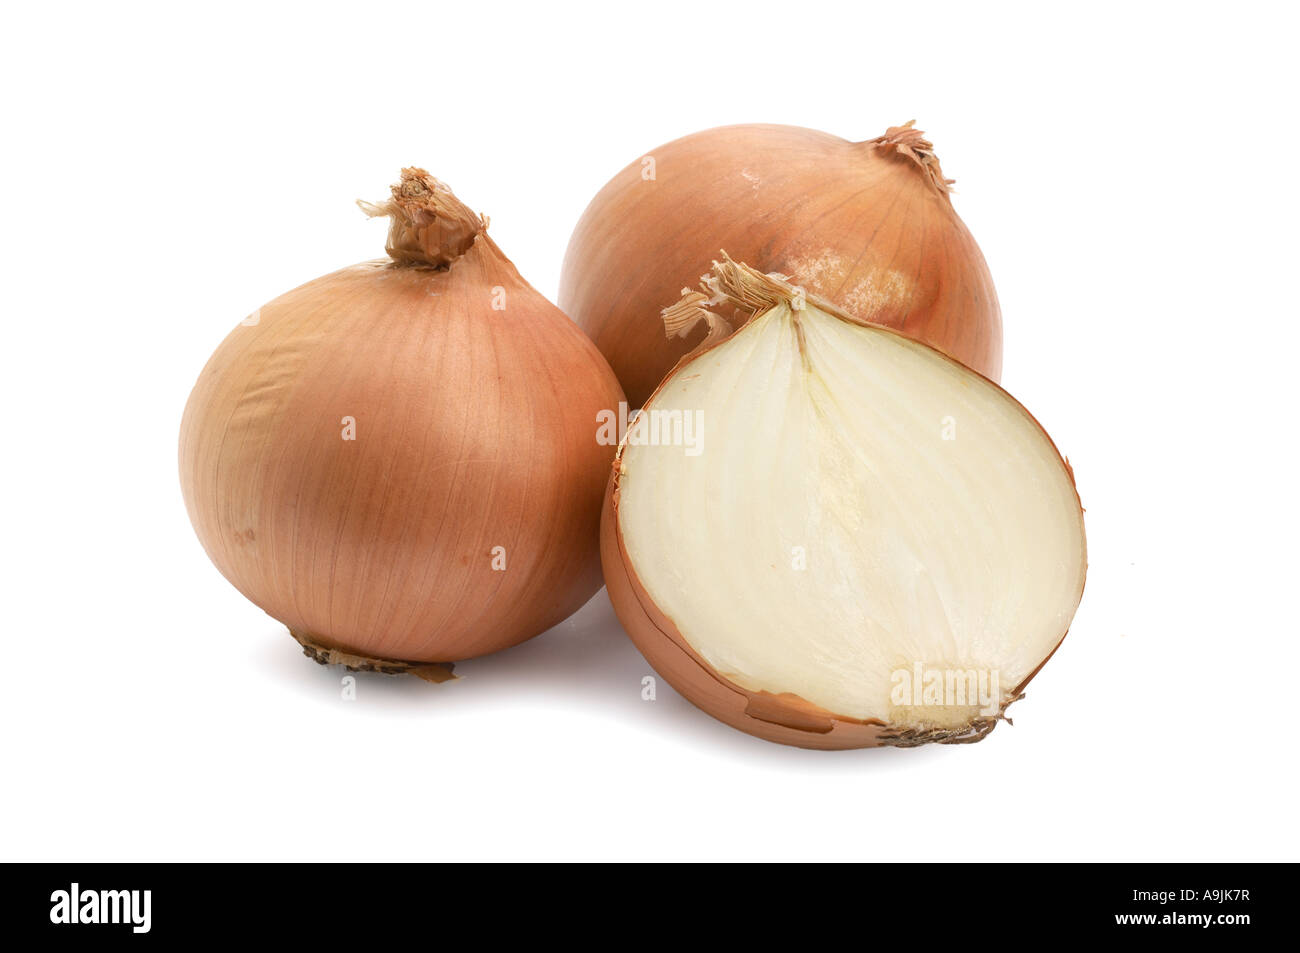 White Onions one cut in half Stock Photo